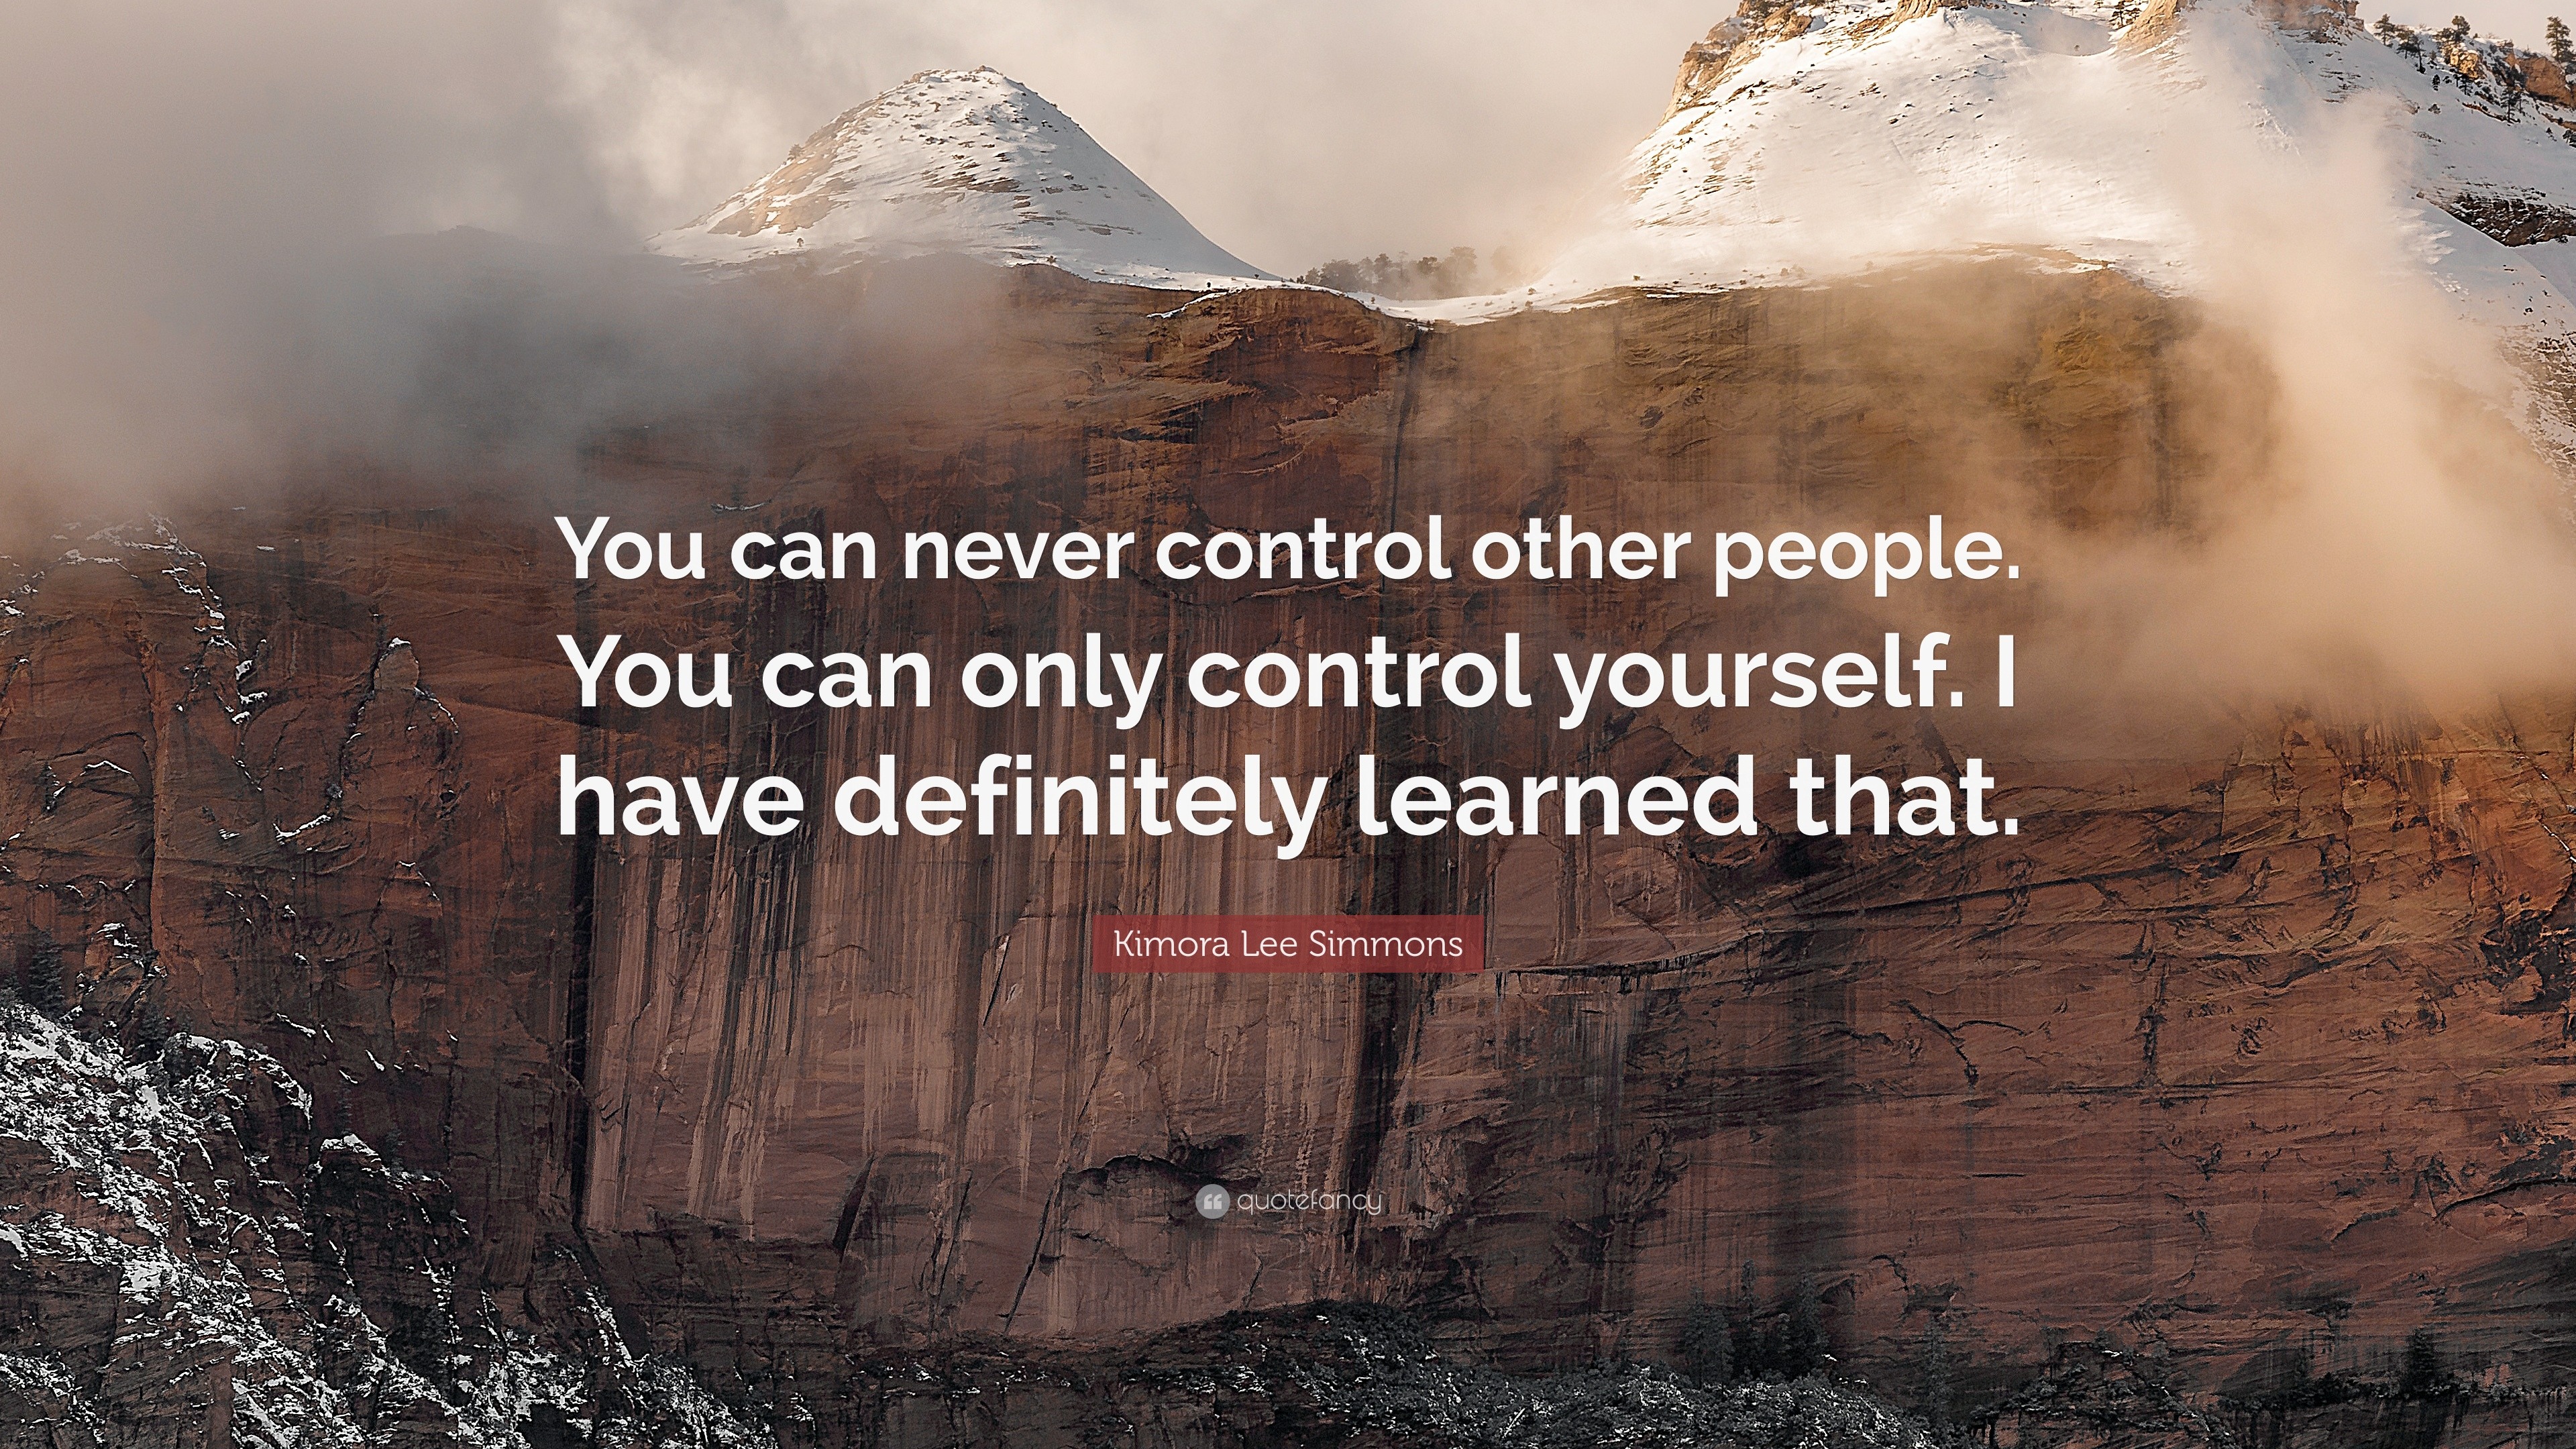 Kimora Lee Simmons Quote You Can Never Control Other People You Can Only Control Yourself I